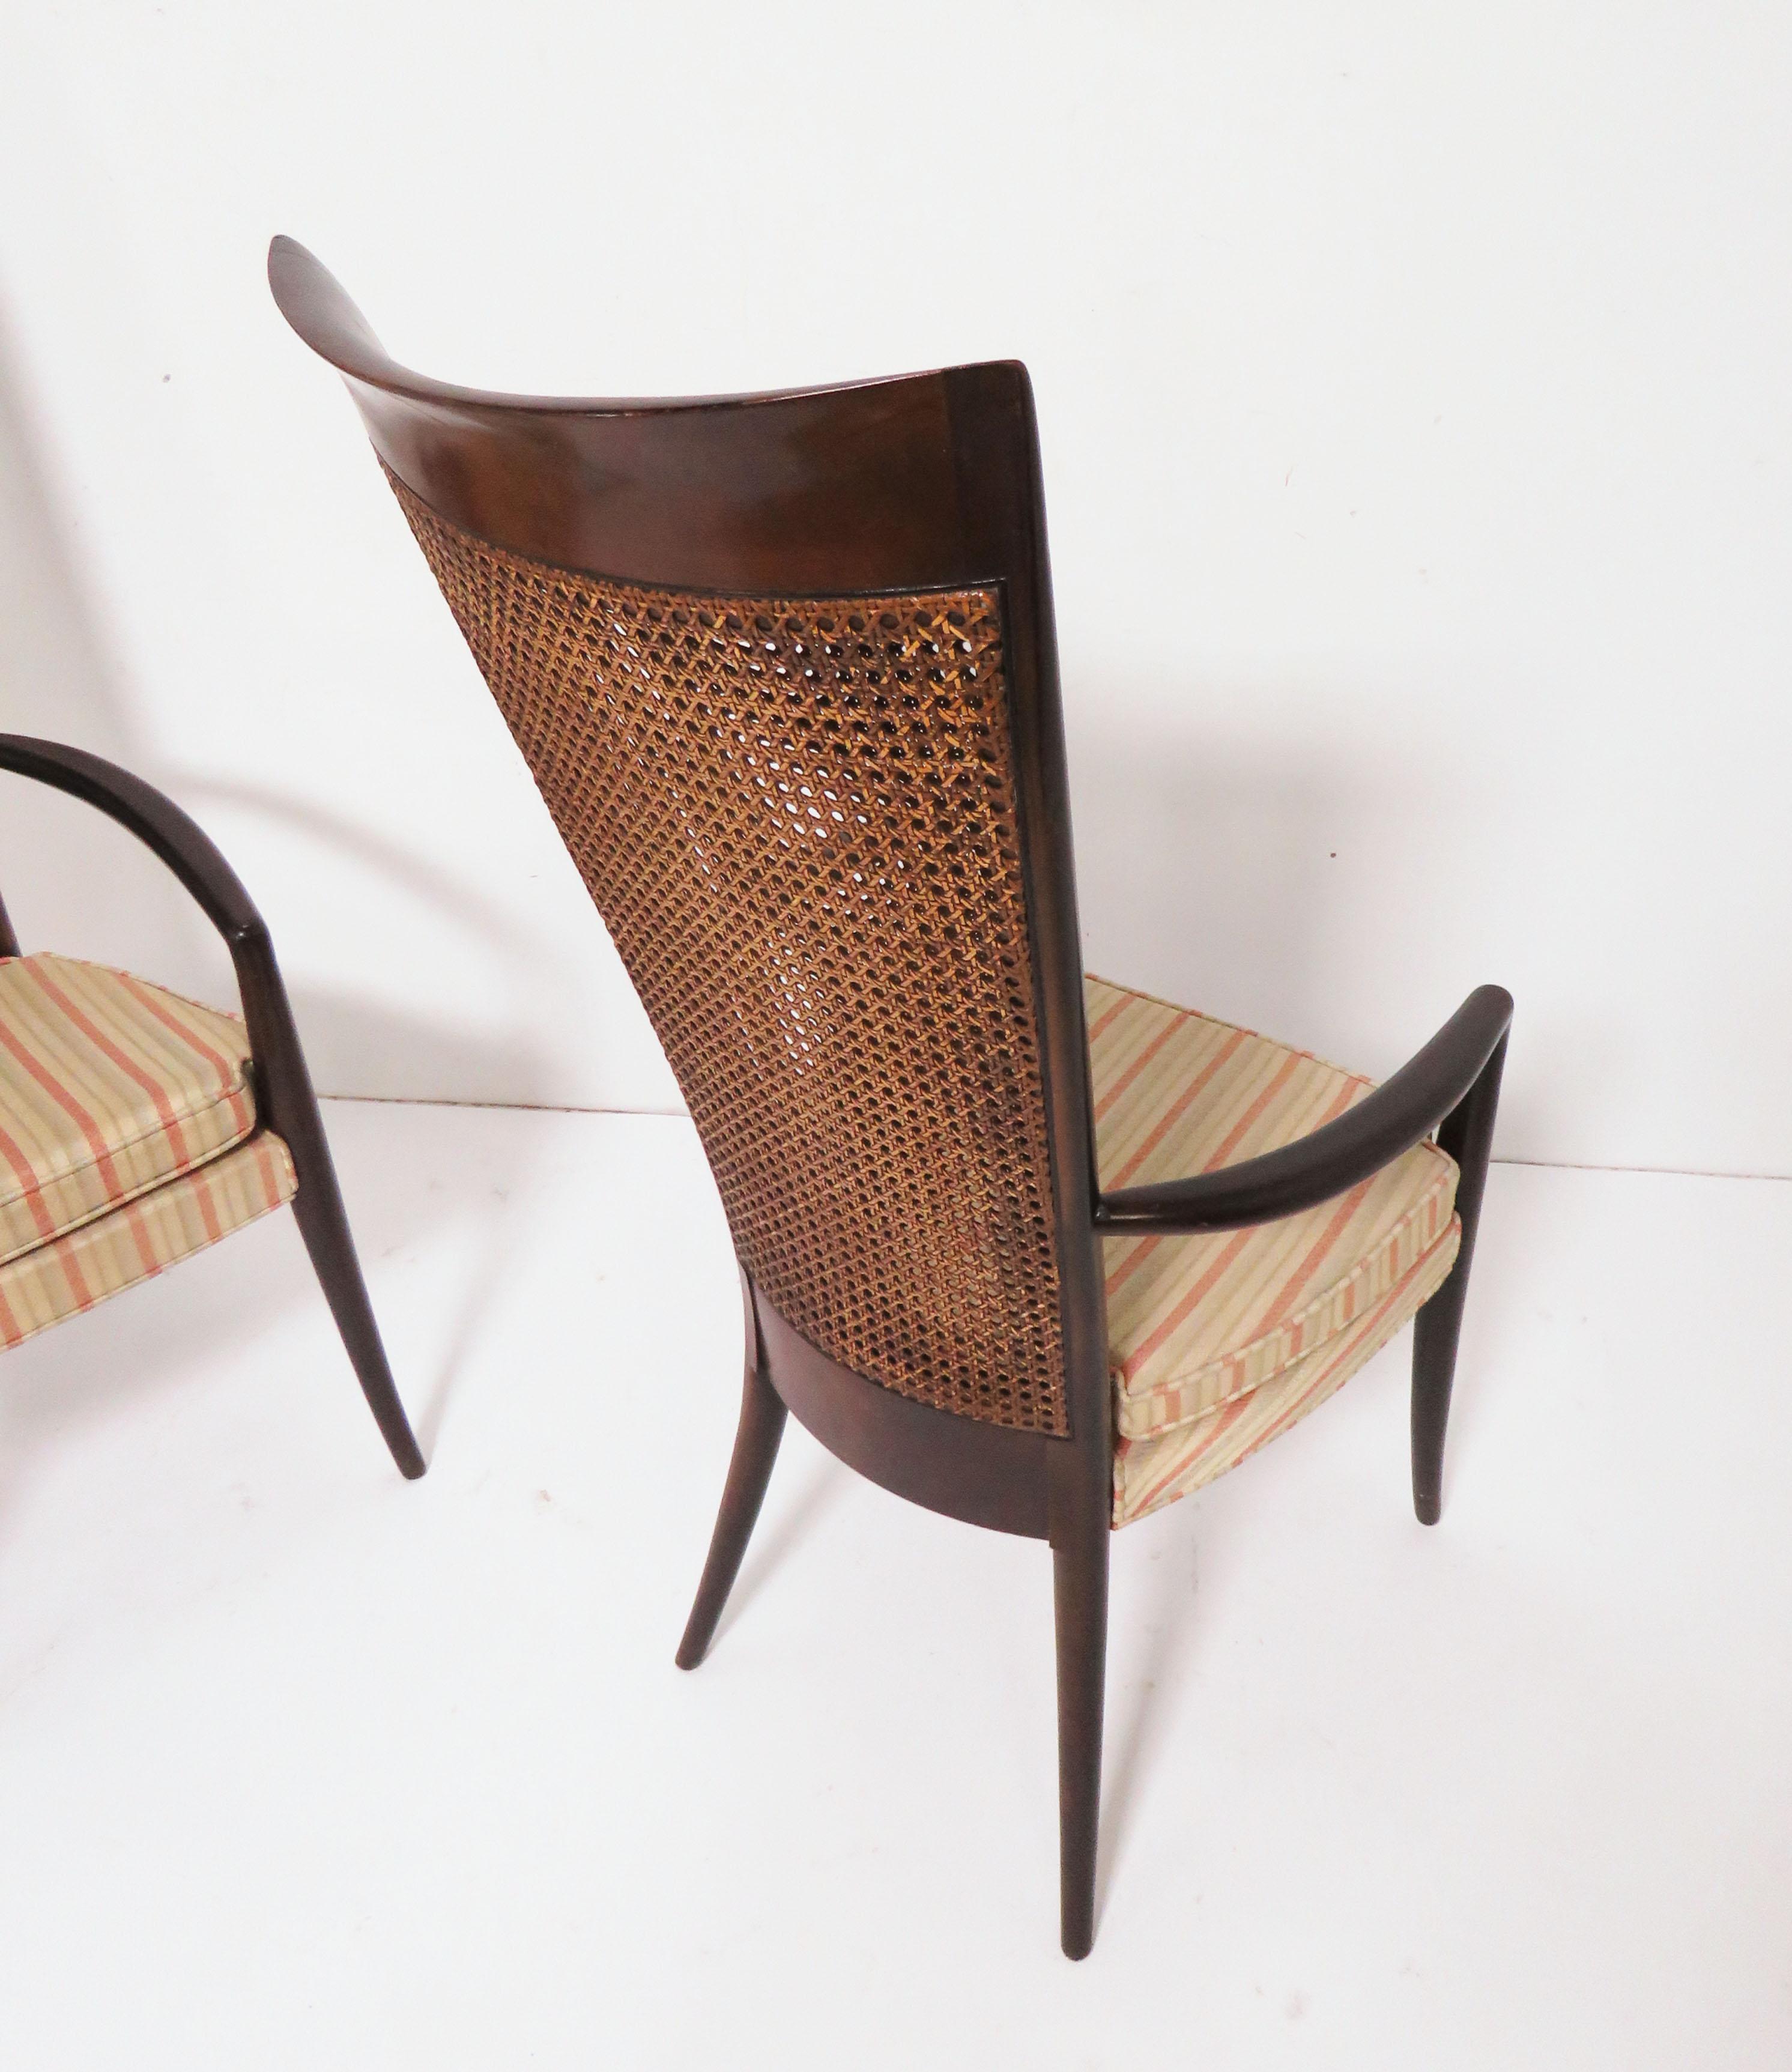 Cane Pair of Italian High Back Armchairs in Manner of Paolo Buffa, circa 1950s